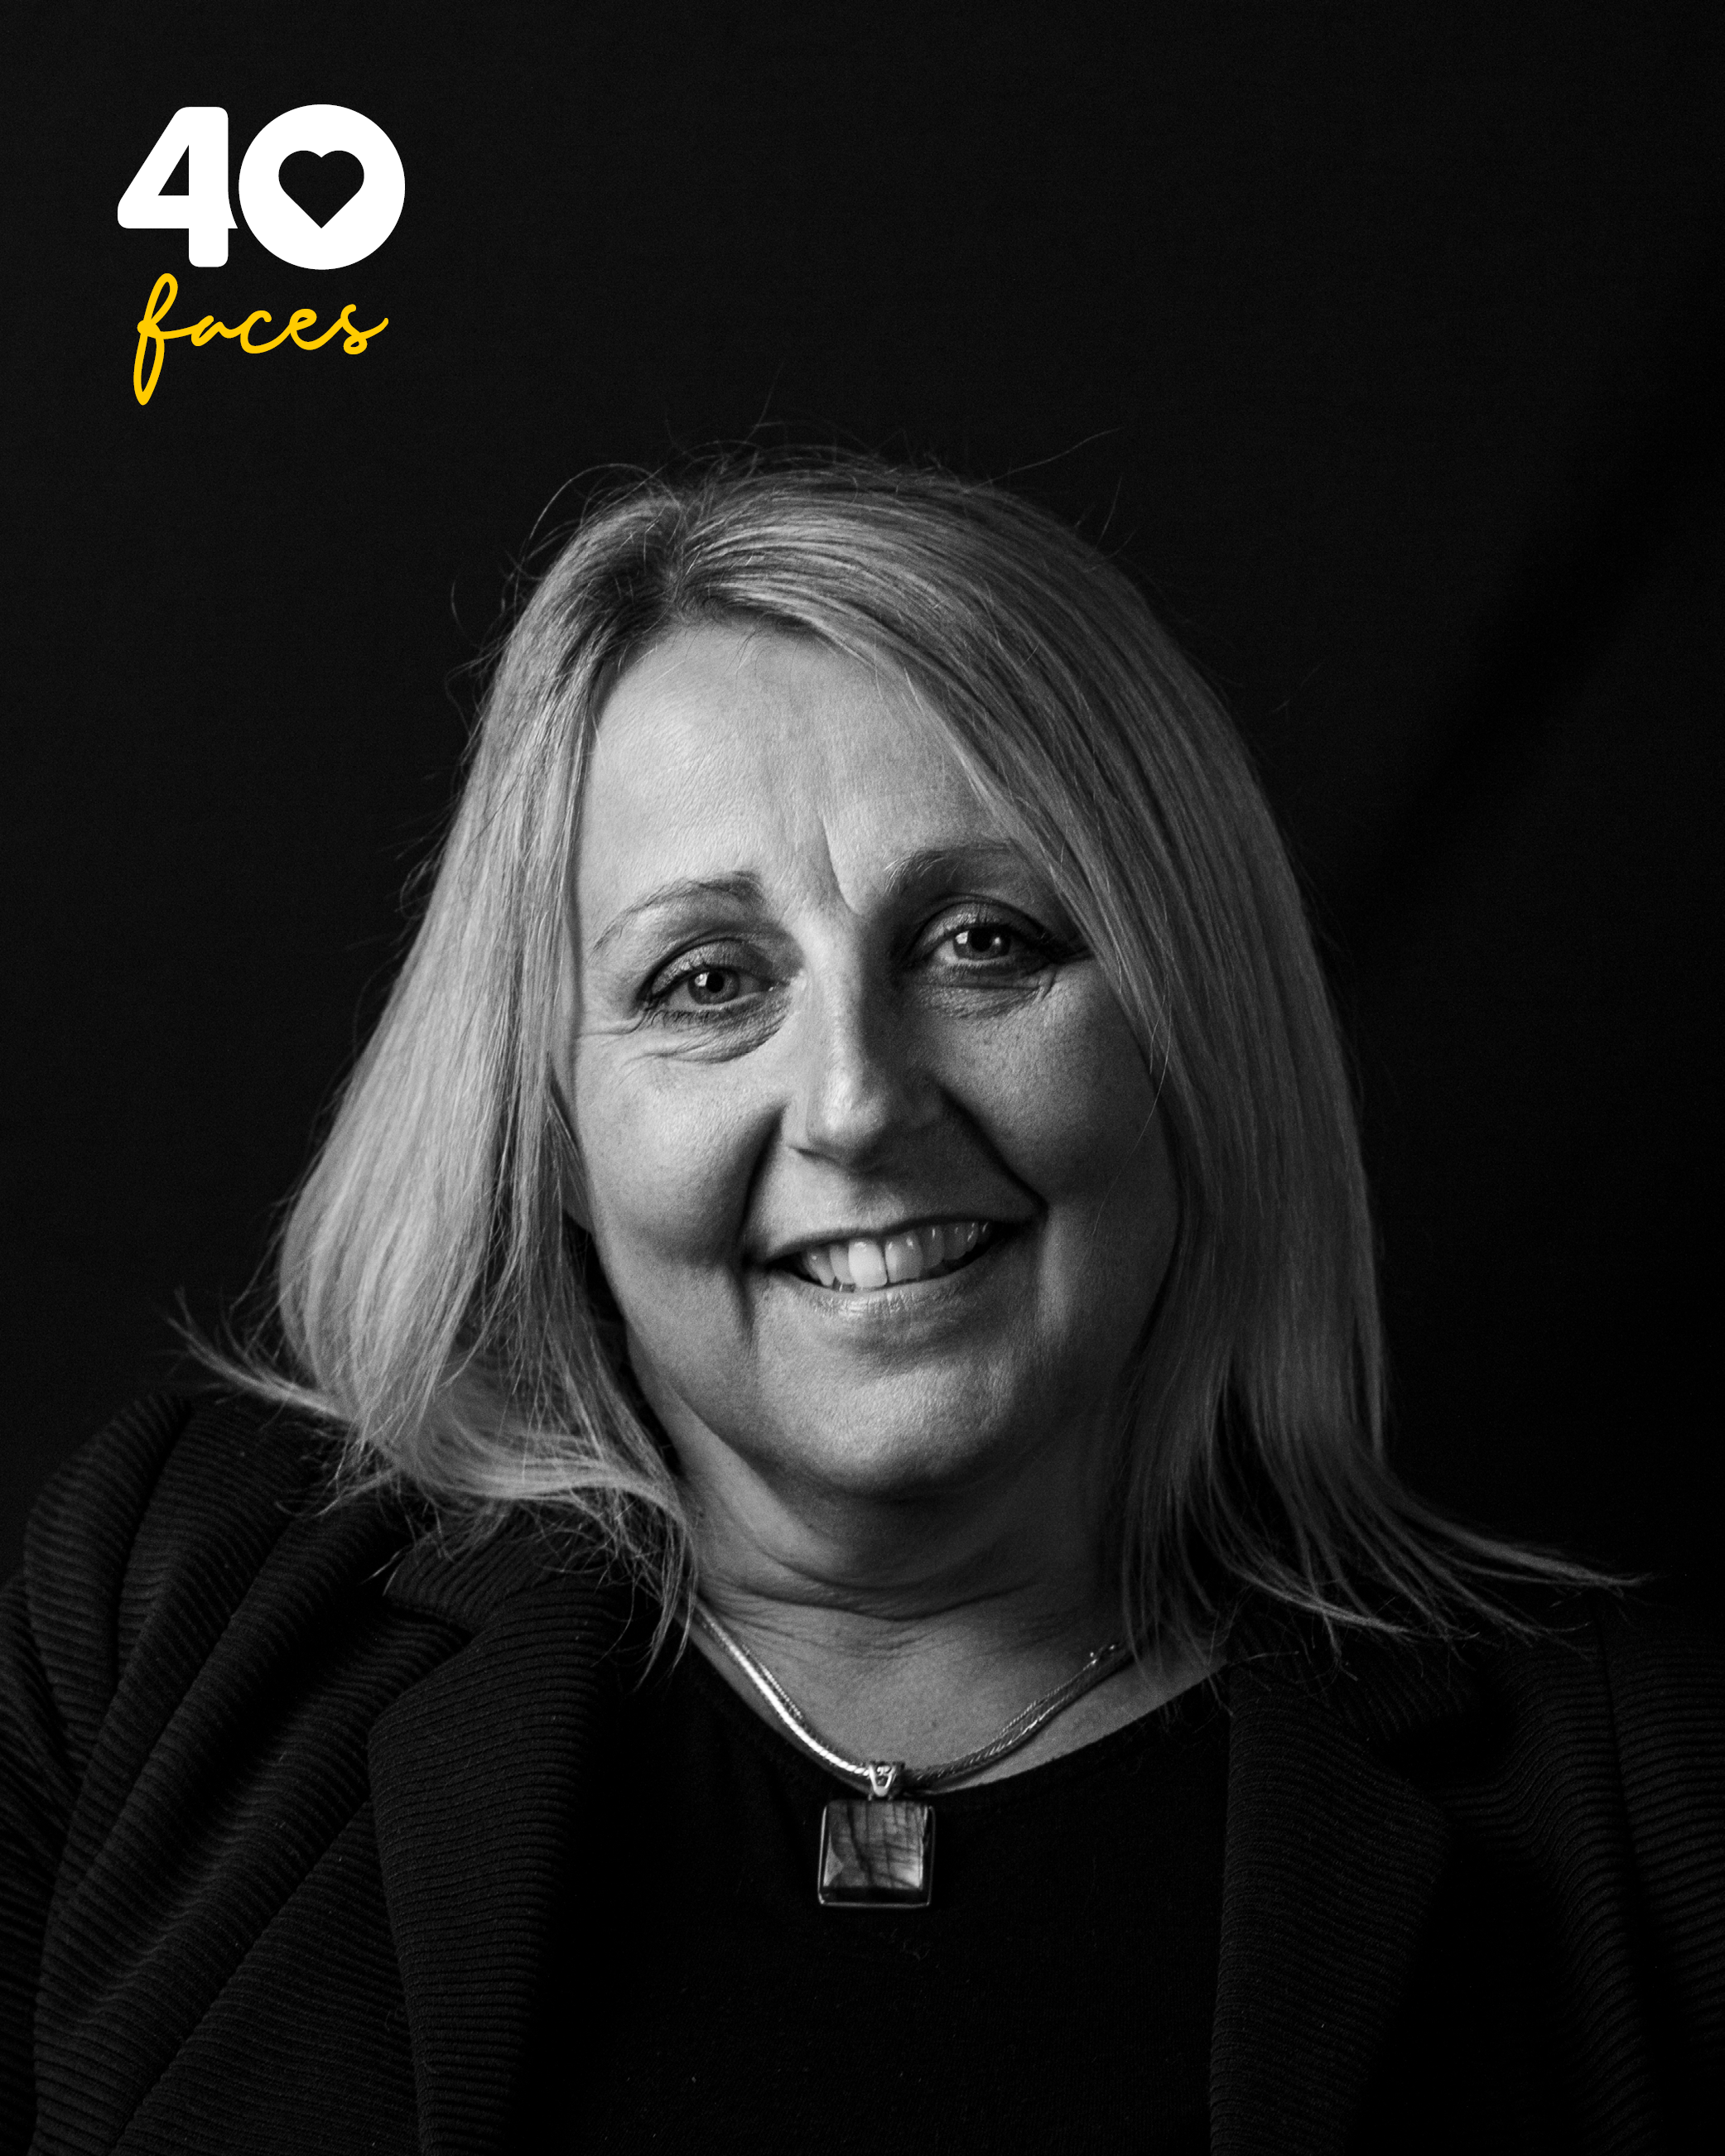 A lady, Caroline Peach, who is Head of Retail at St Barnabas Hospice, photographed in black and white, against a black backdrop